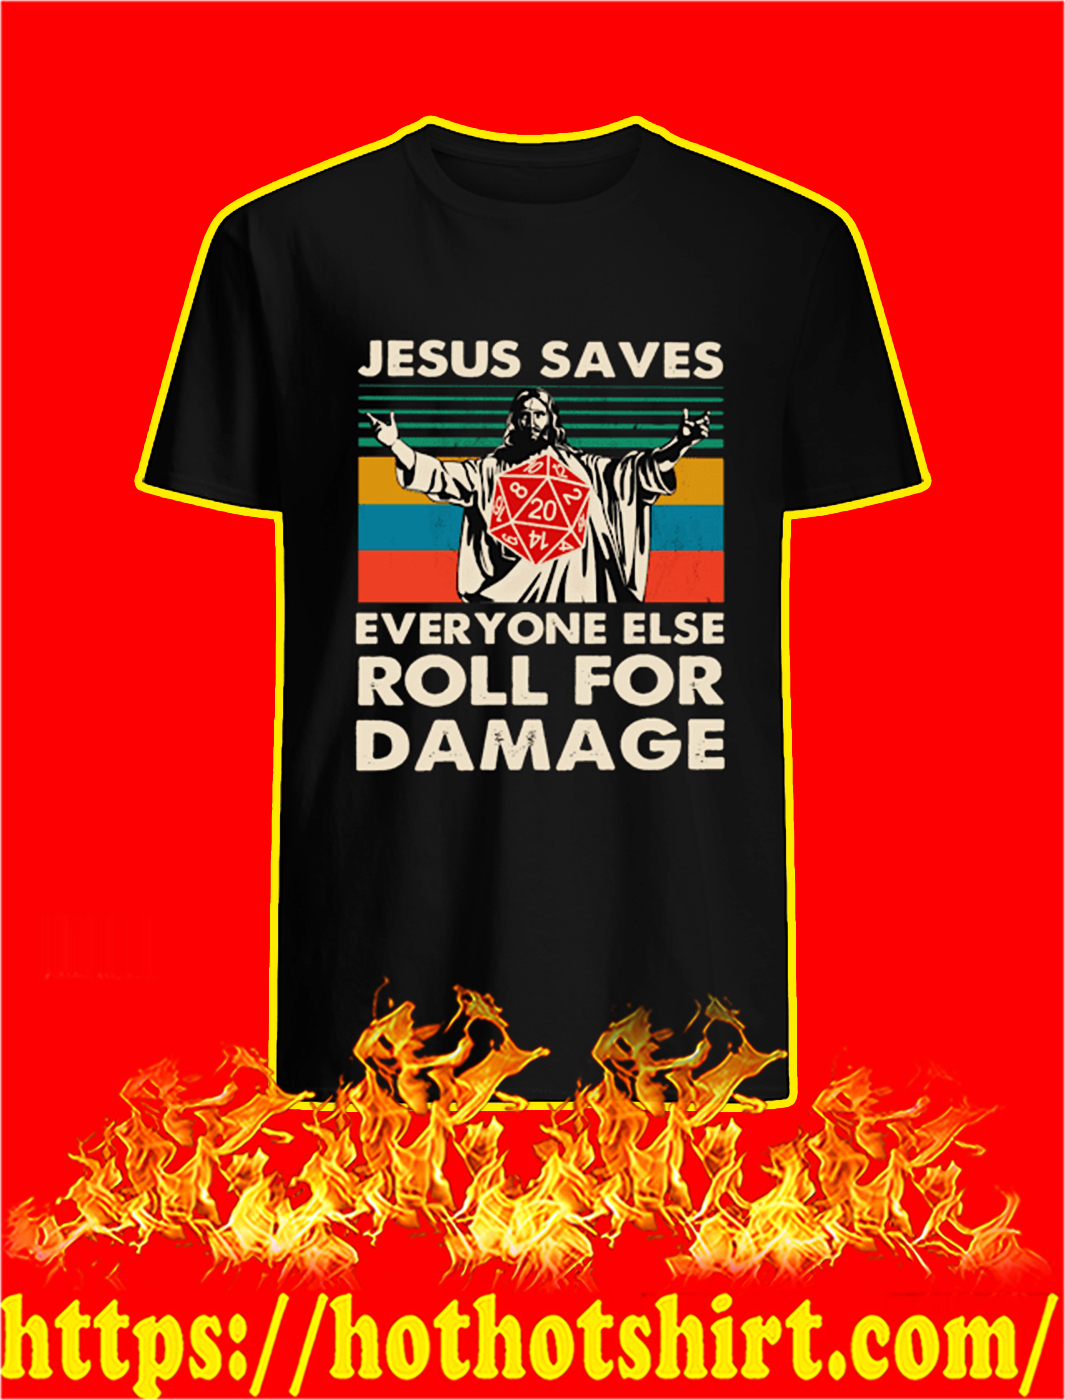 Jesus saves everyone else roll for damage shirt and lady shirt and sweatshirt